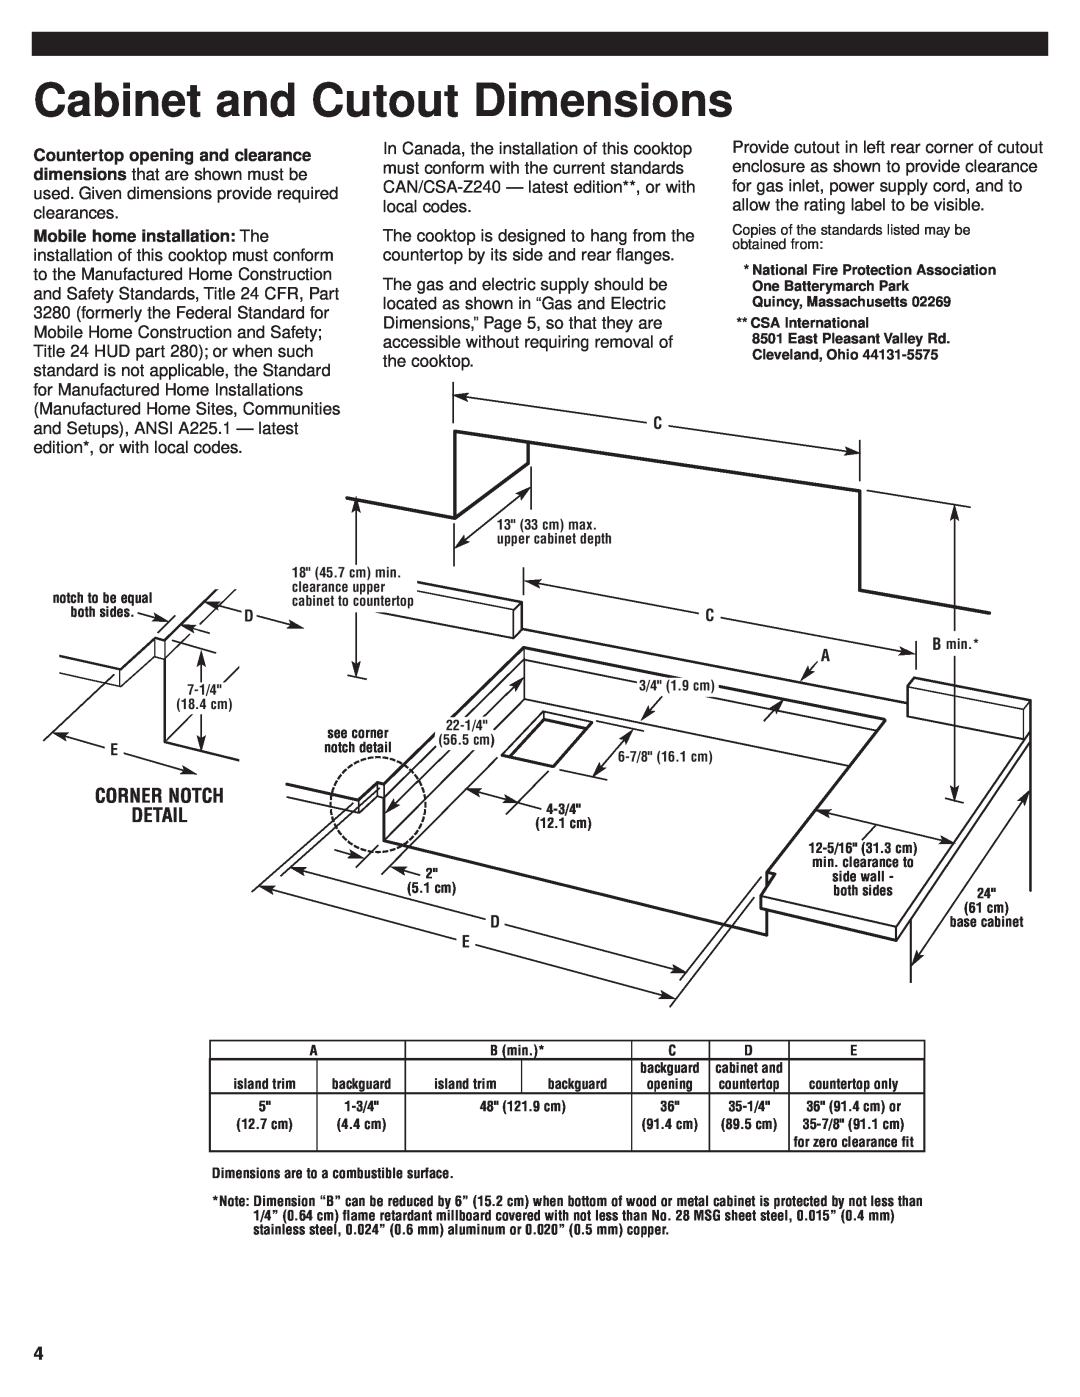 KitchenAid 8285418 installation instructions Cabinet and Cutout Dimensions 